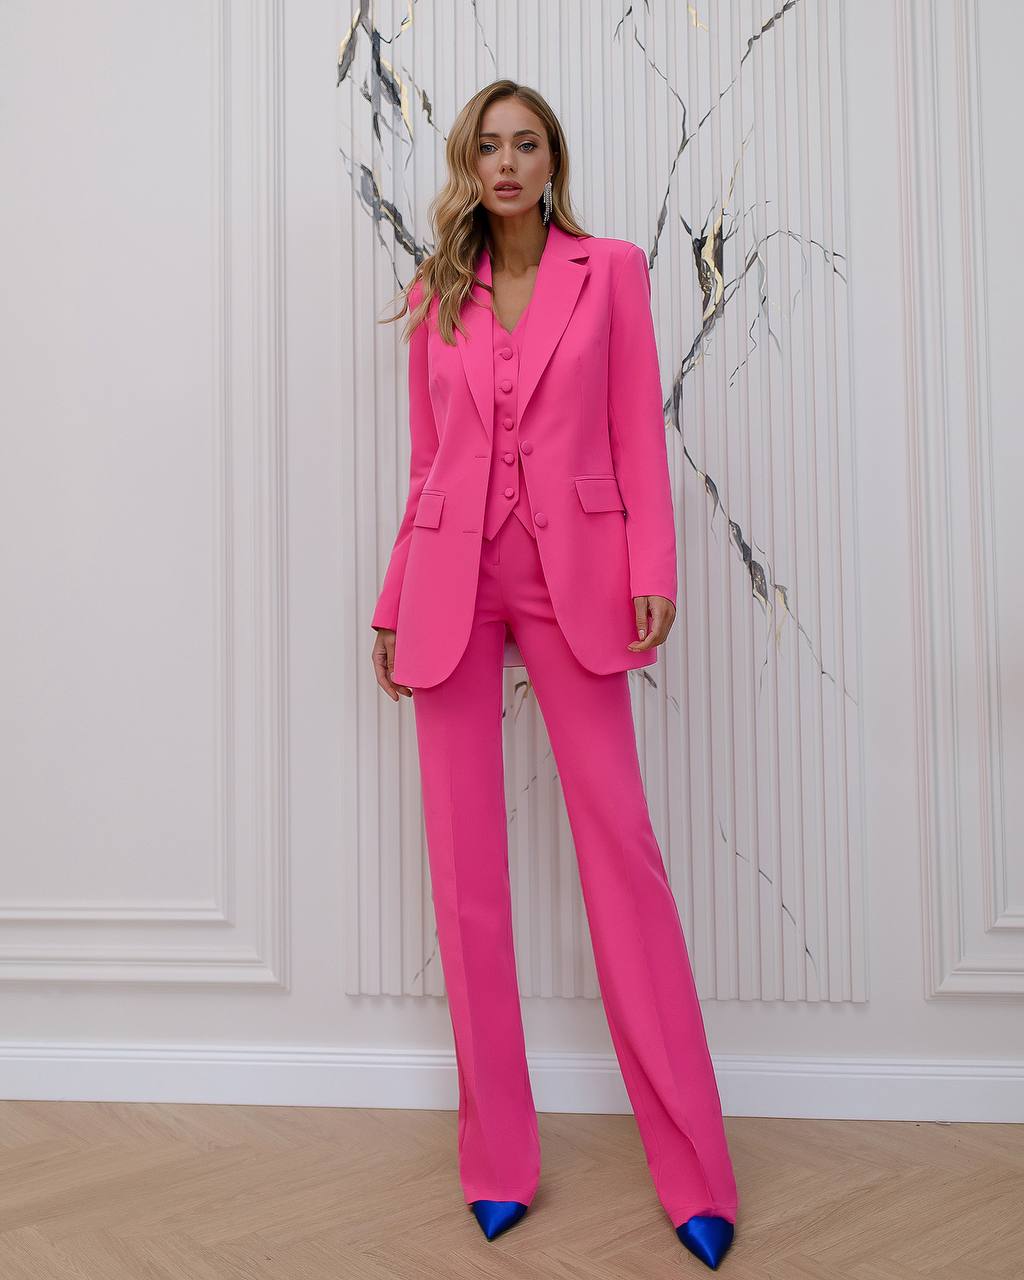 a woman wearing a pink suit and blue shoes